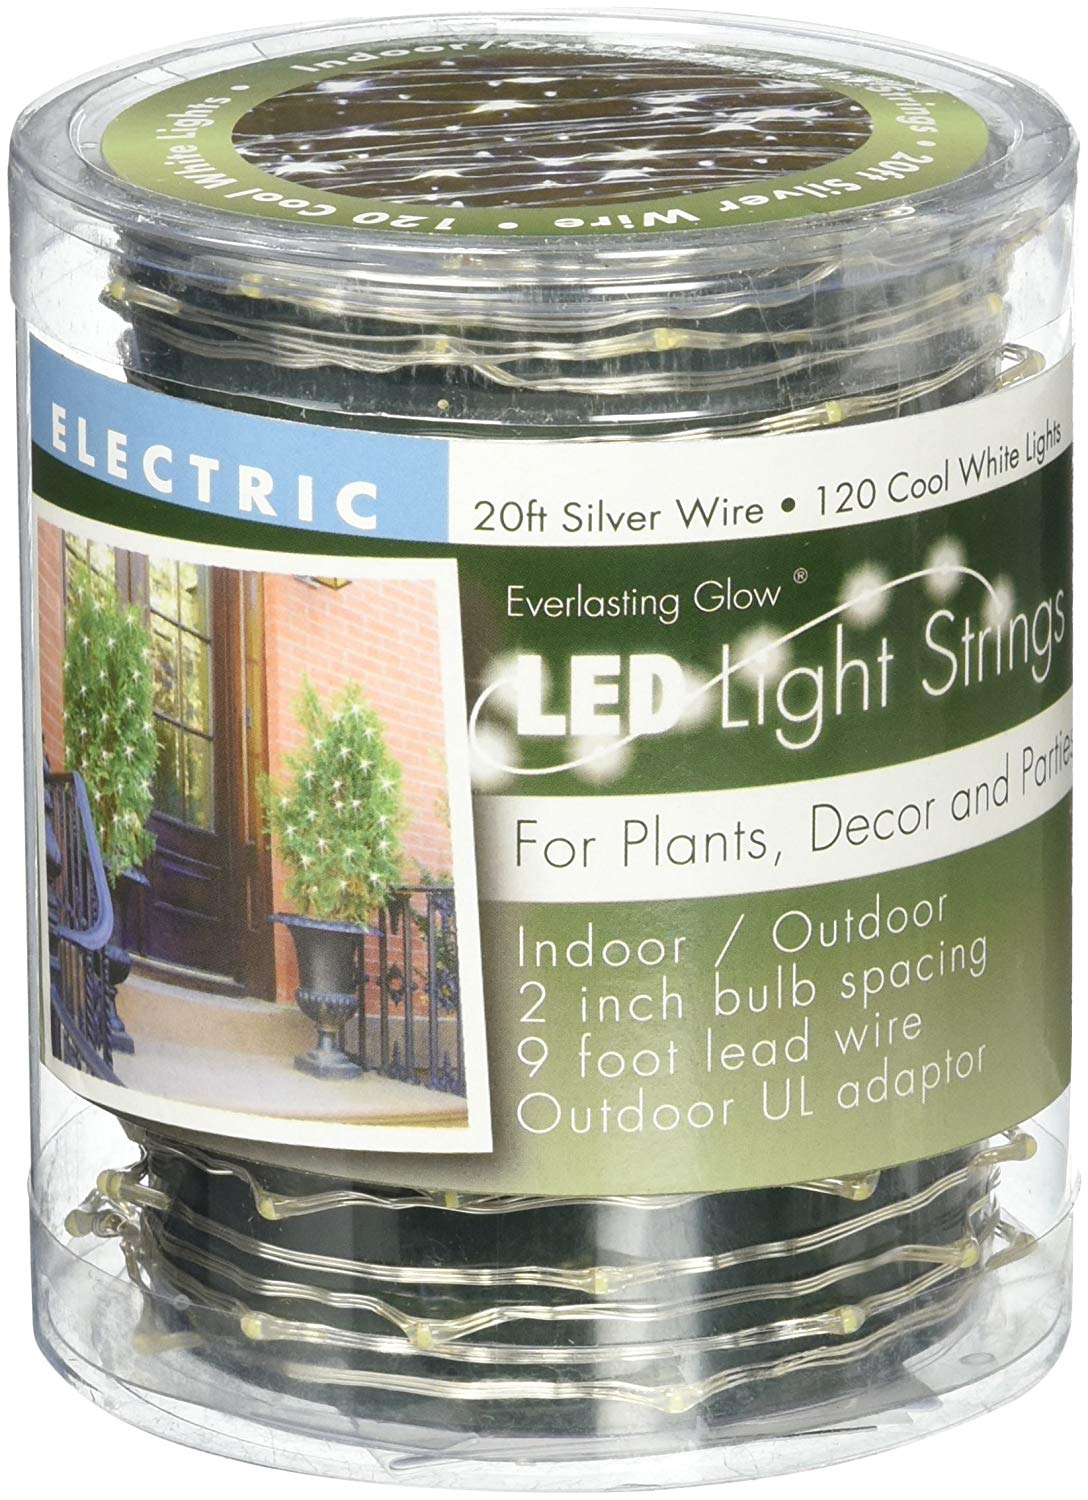 Everlasting Glow 38656 Cool White Micro 120-LED String Light, Silver Wire, 20'